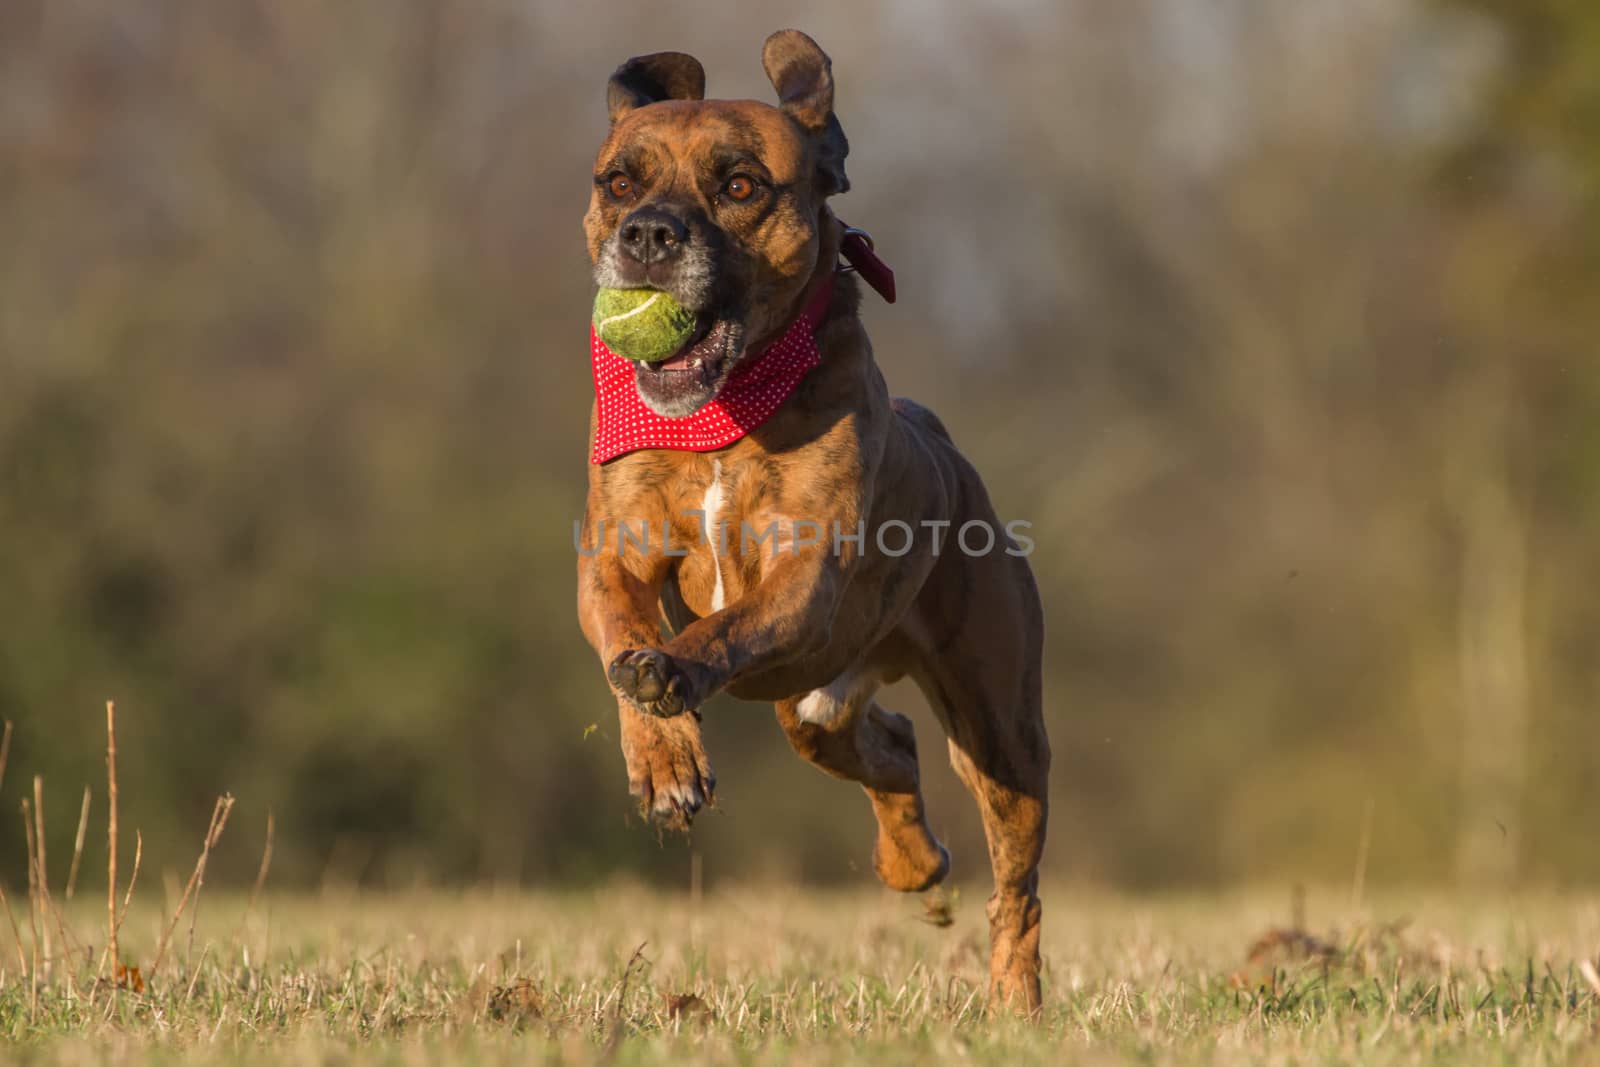 Happy Pet Dog Running With Ball in field, park or open space